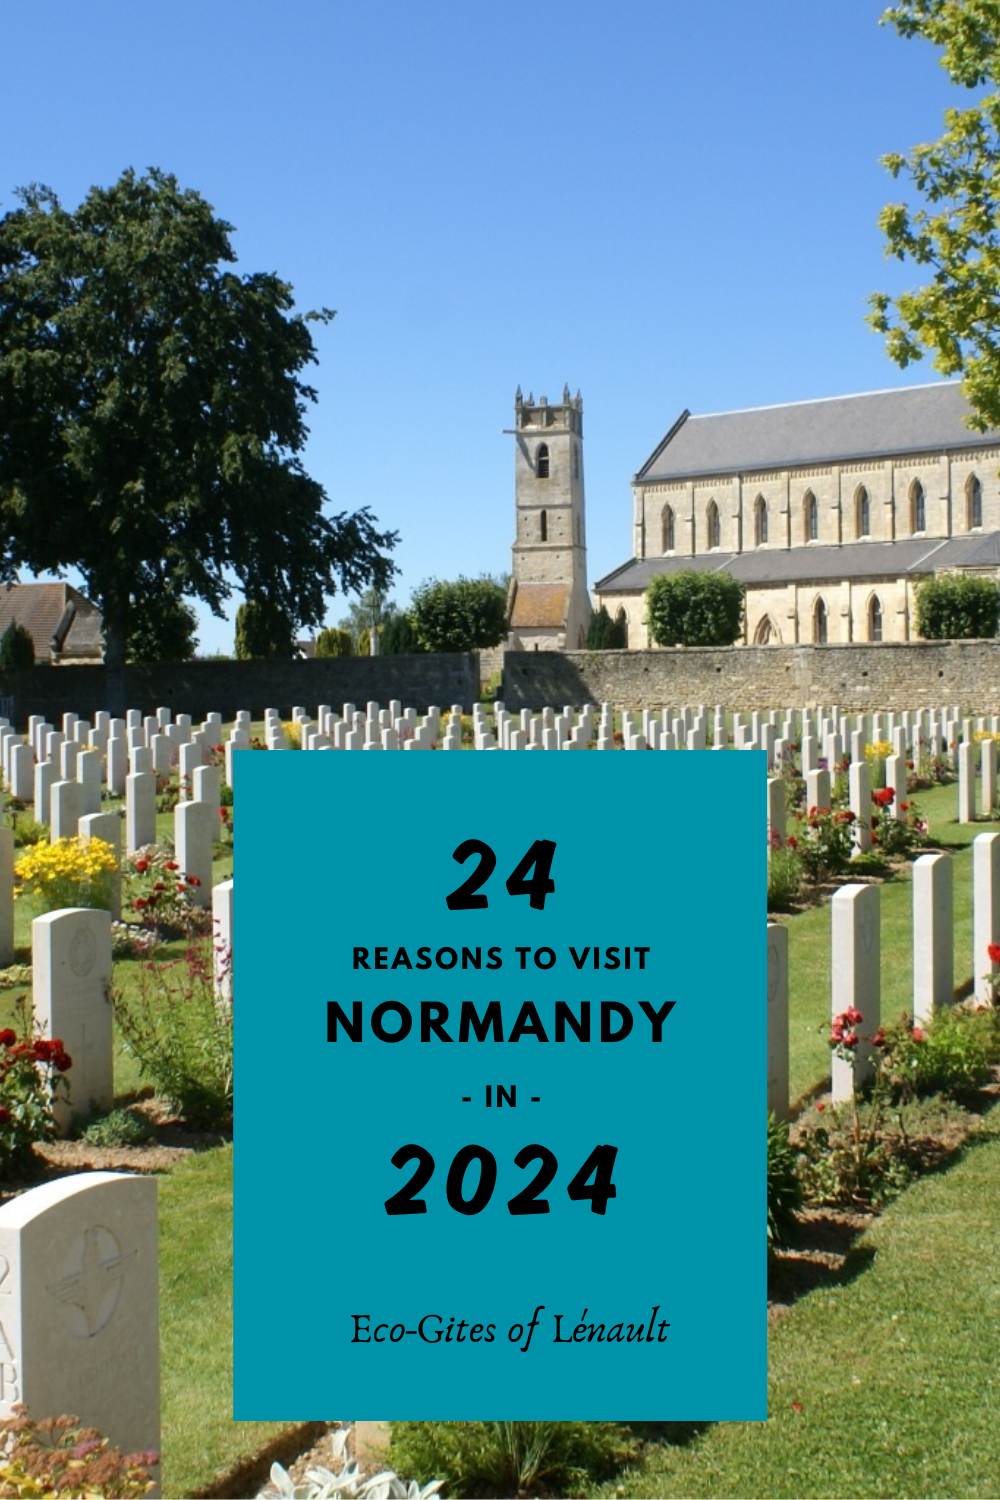 24 reasons to visit Normandy in 2024